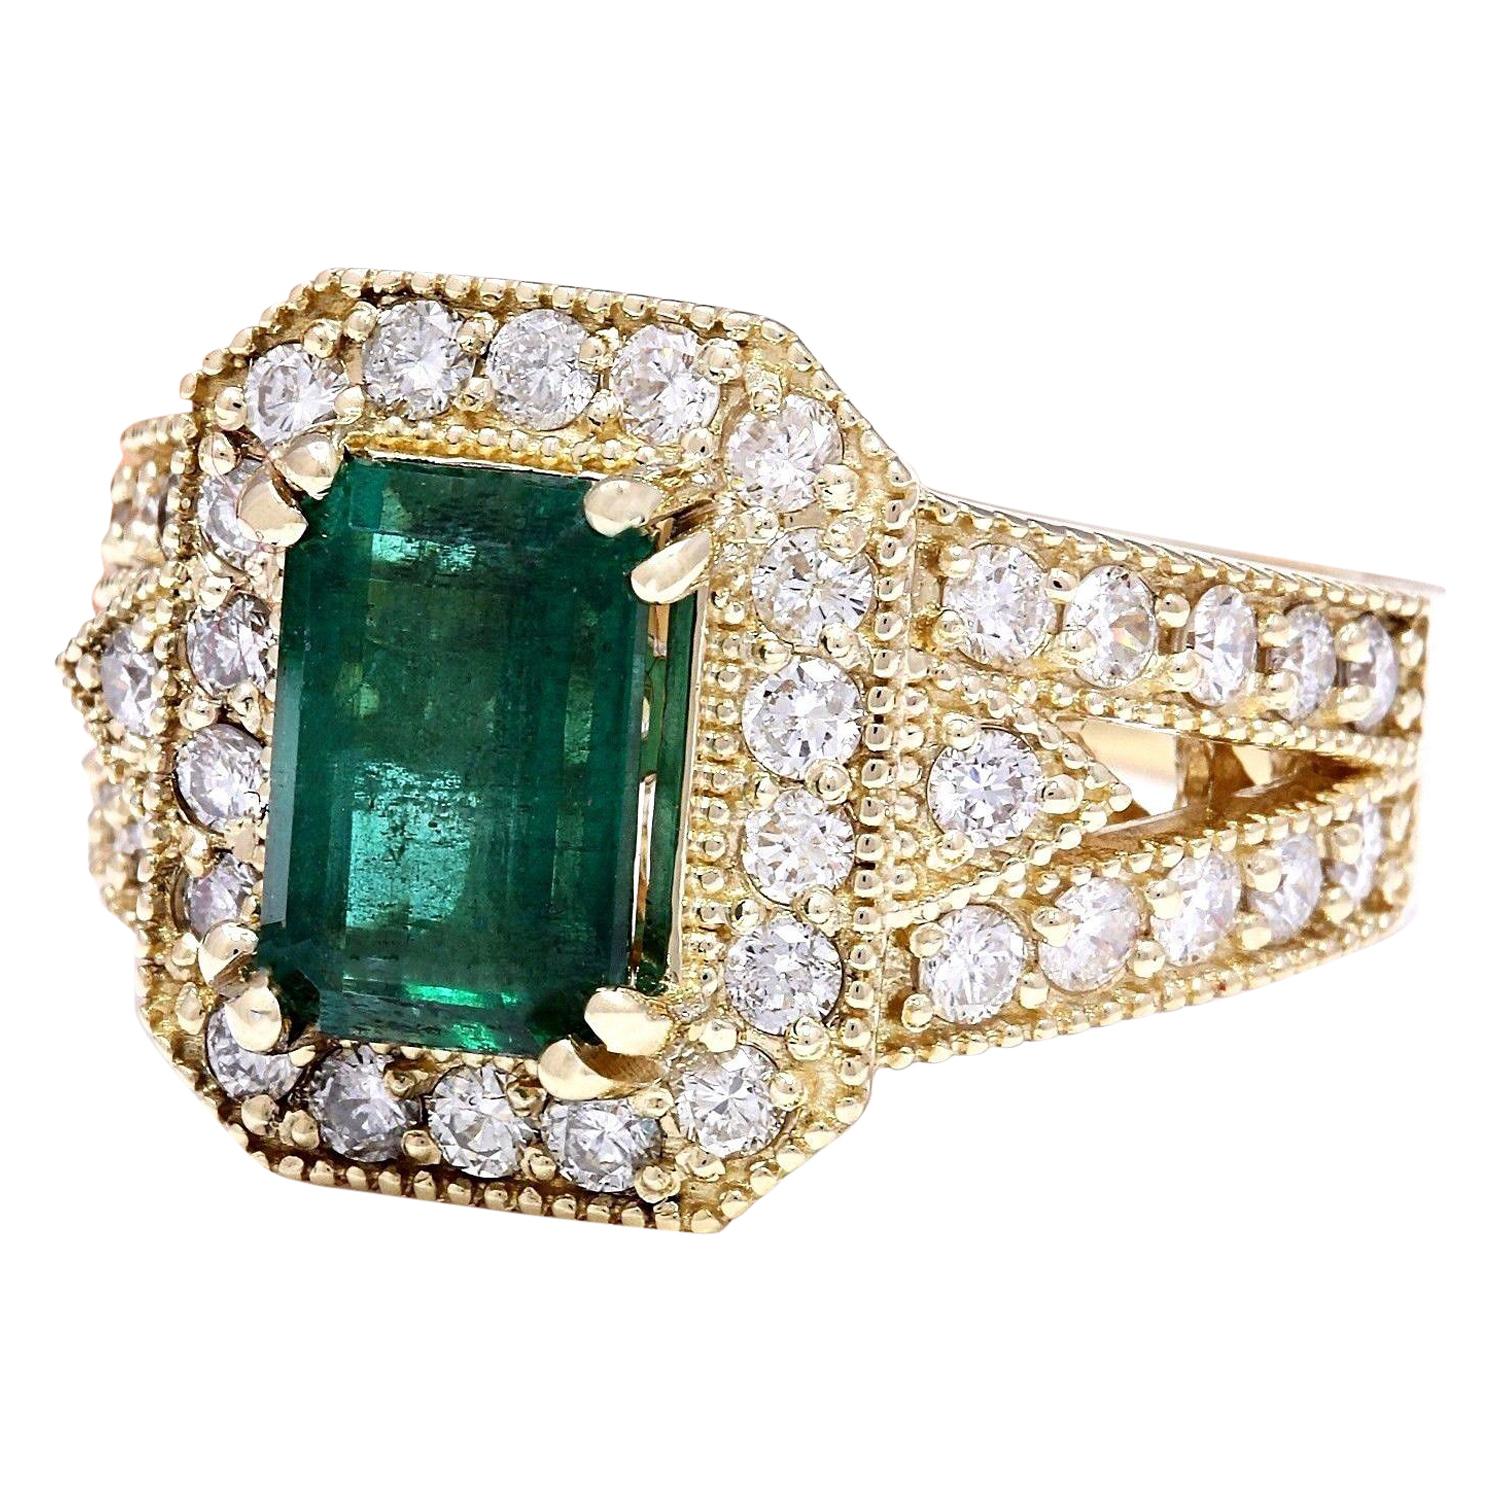 3.50 Carat Natural Emerald 14K Solid Yellow Gold Diamond Ring
 Item Type: Ring
 Item Style: Engagement
 Material: 14K Yellow Gold
 Mainstone: Emerald
 Stone Color: Green
 Stone Weight: 2.40 Carat
 Stone Shape: Emerald
 Stone Quantity: 1
 Stone